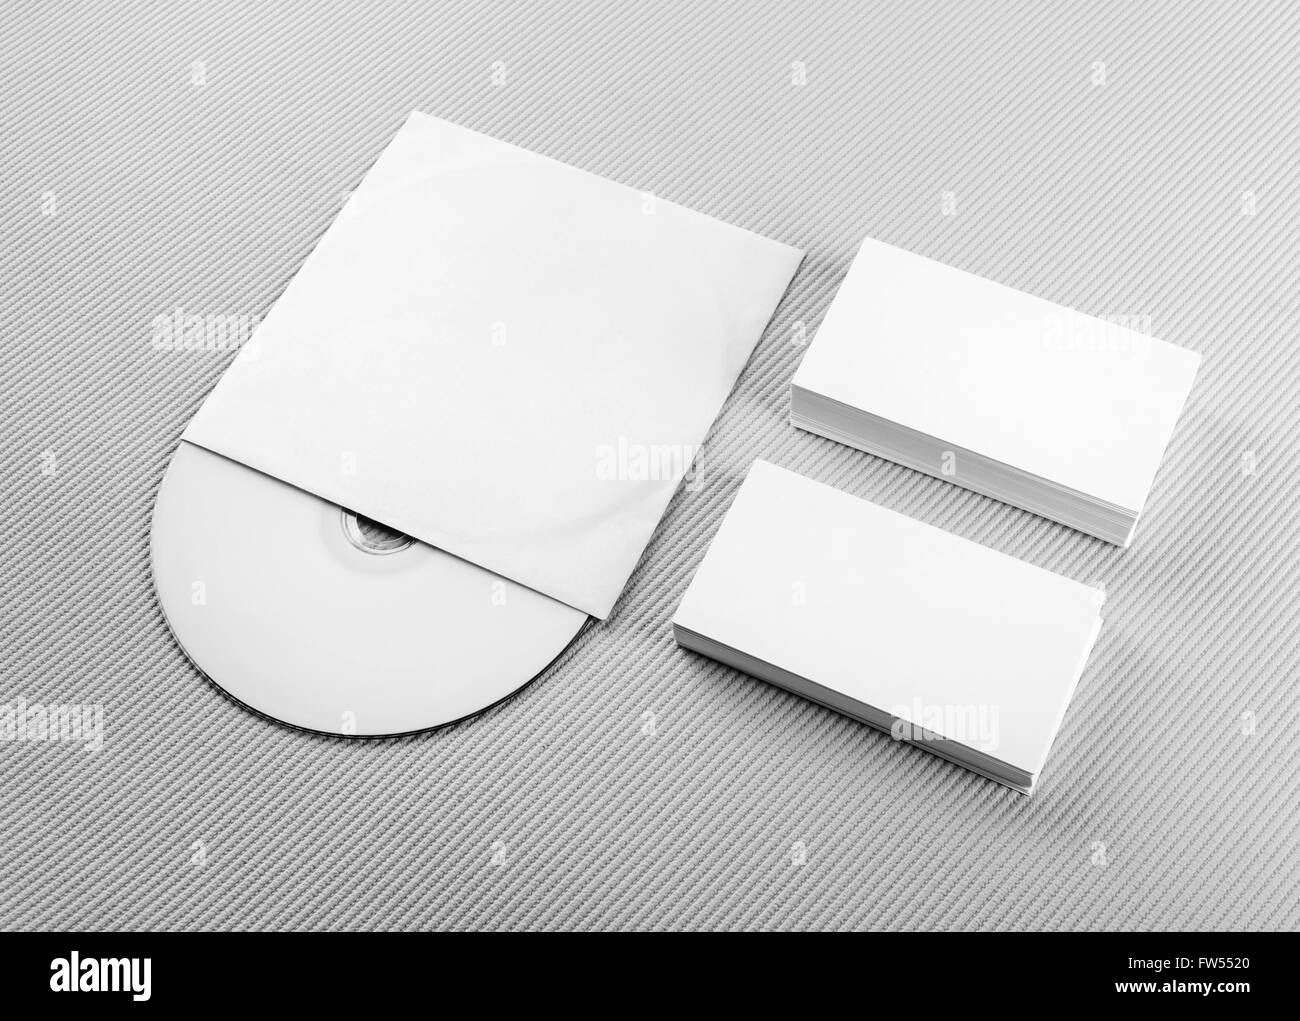 Blank business cards and CD on gray background. For design presentations and portfolios. Mockup for branding identity. Stock Photo